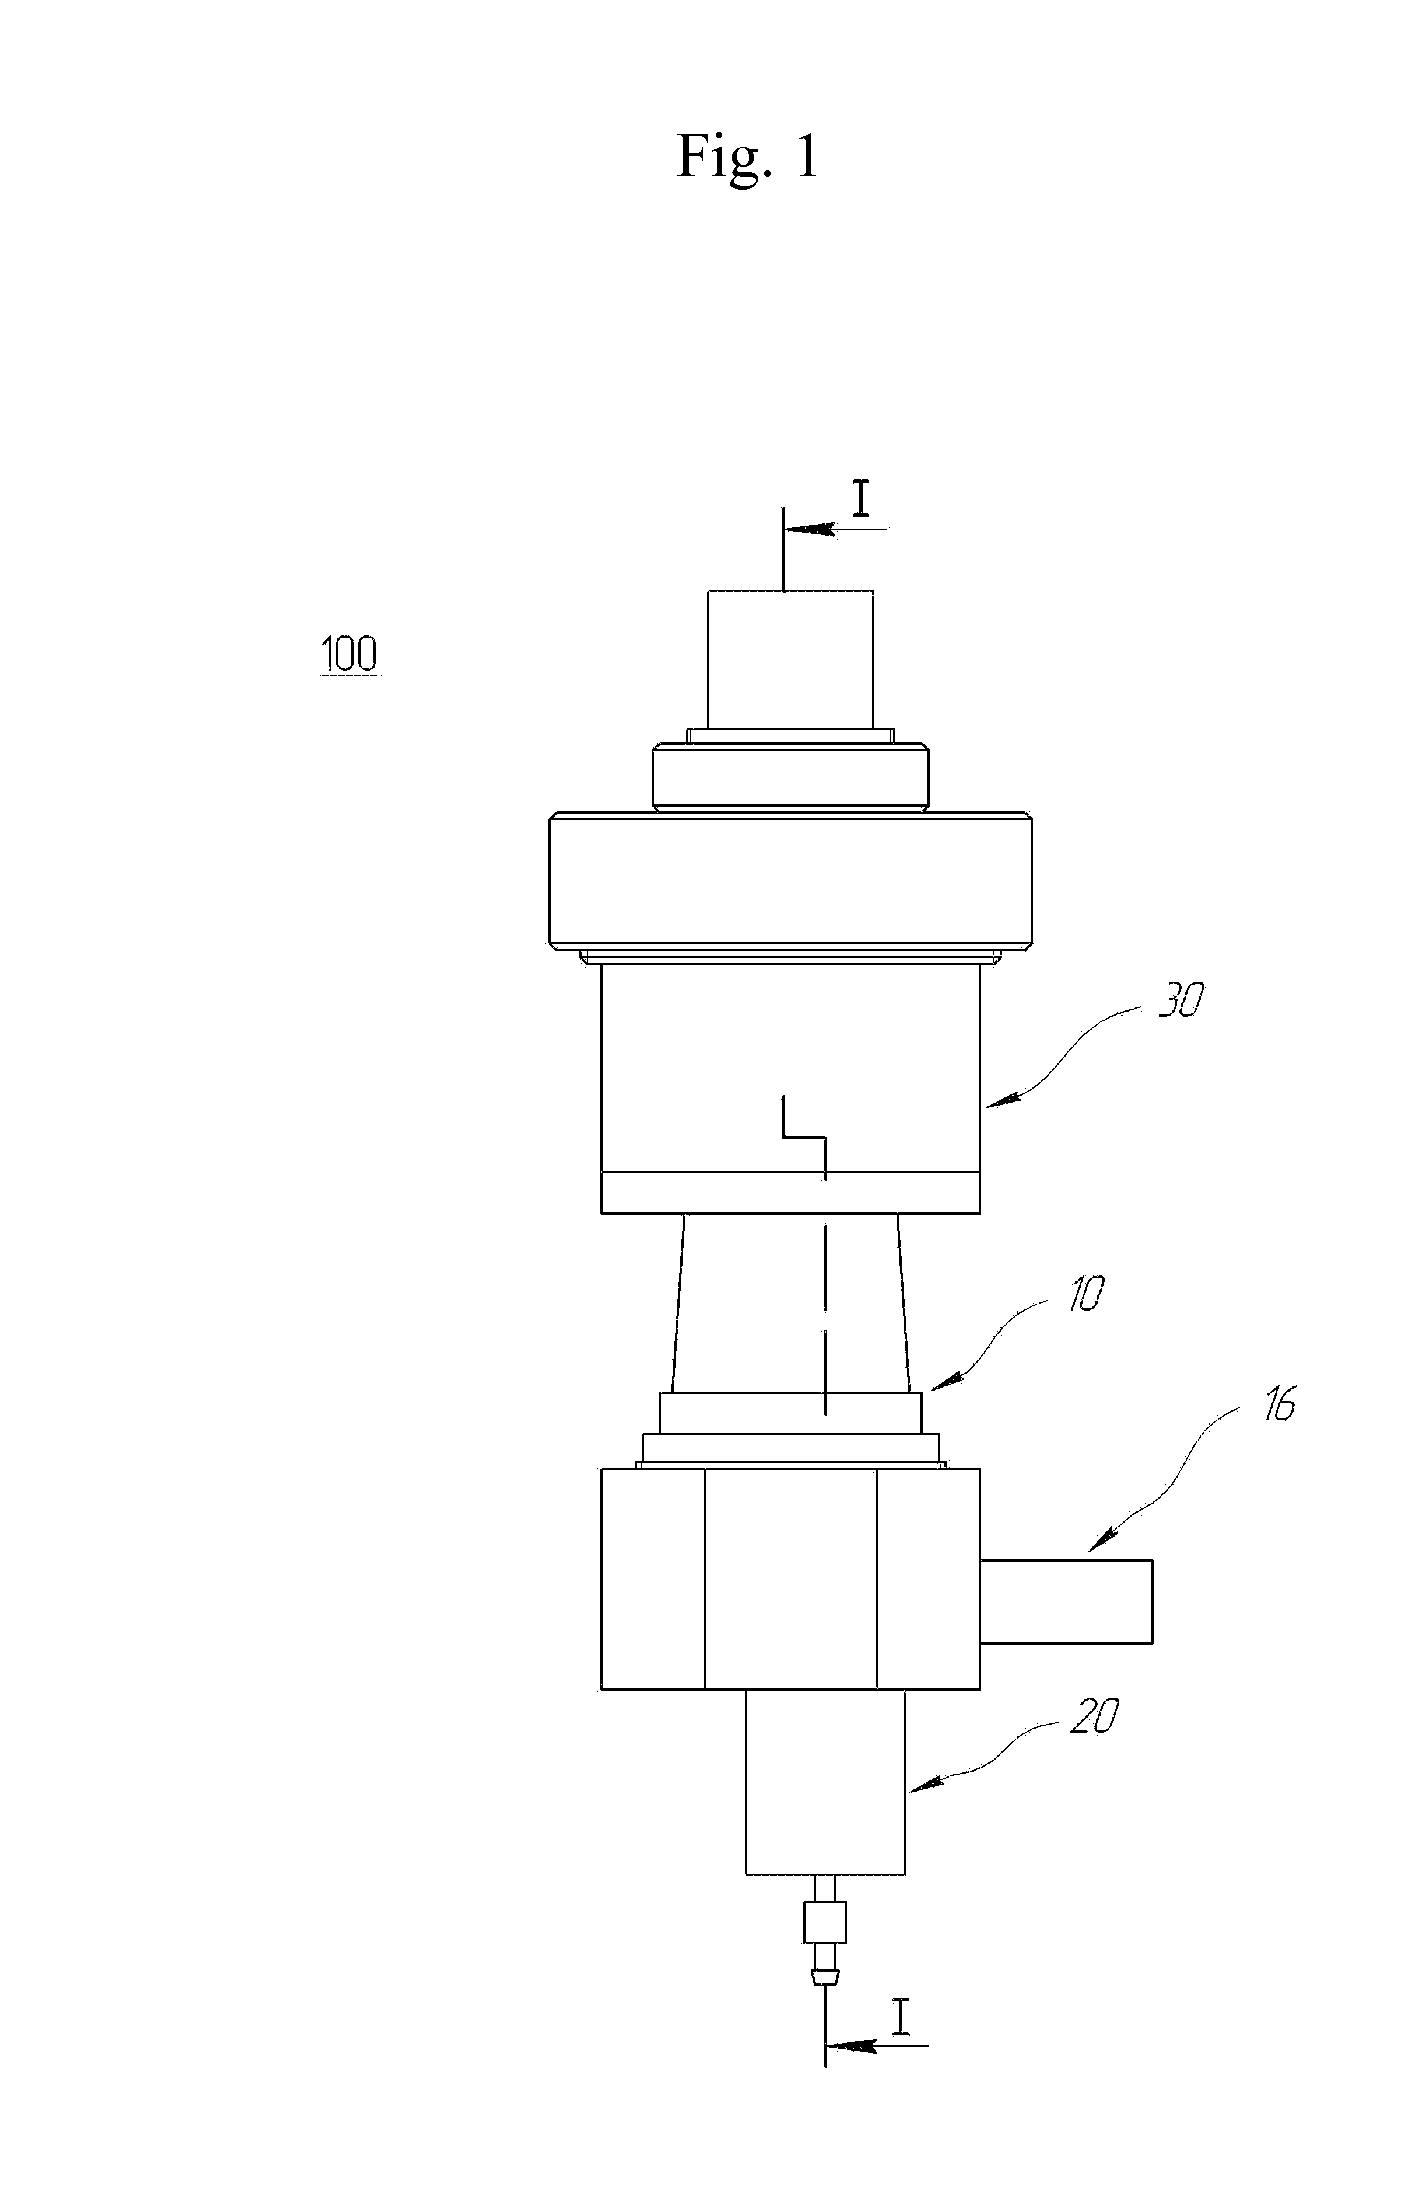 Apparatus and method for collecting and detecting airborne particles